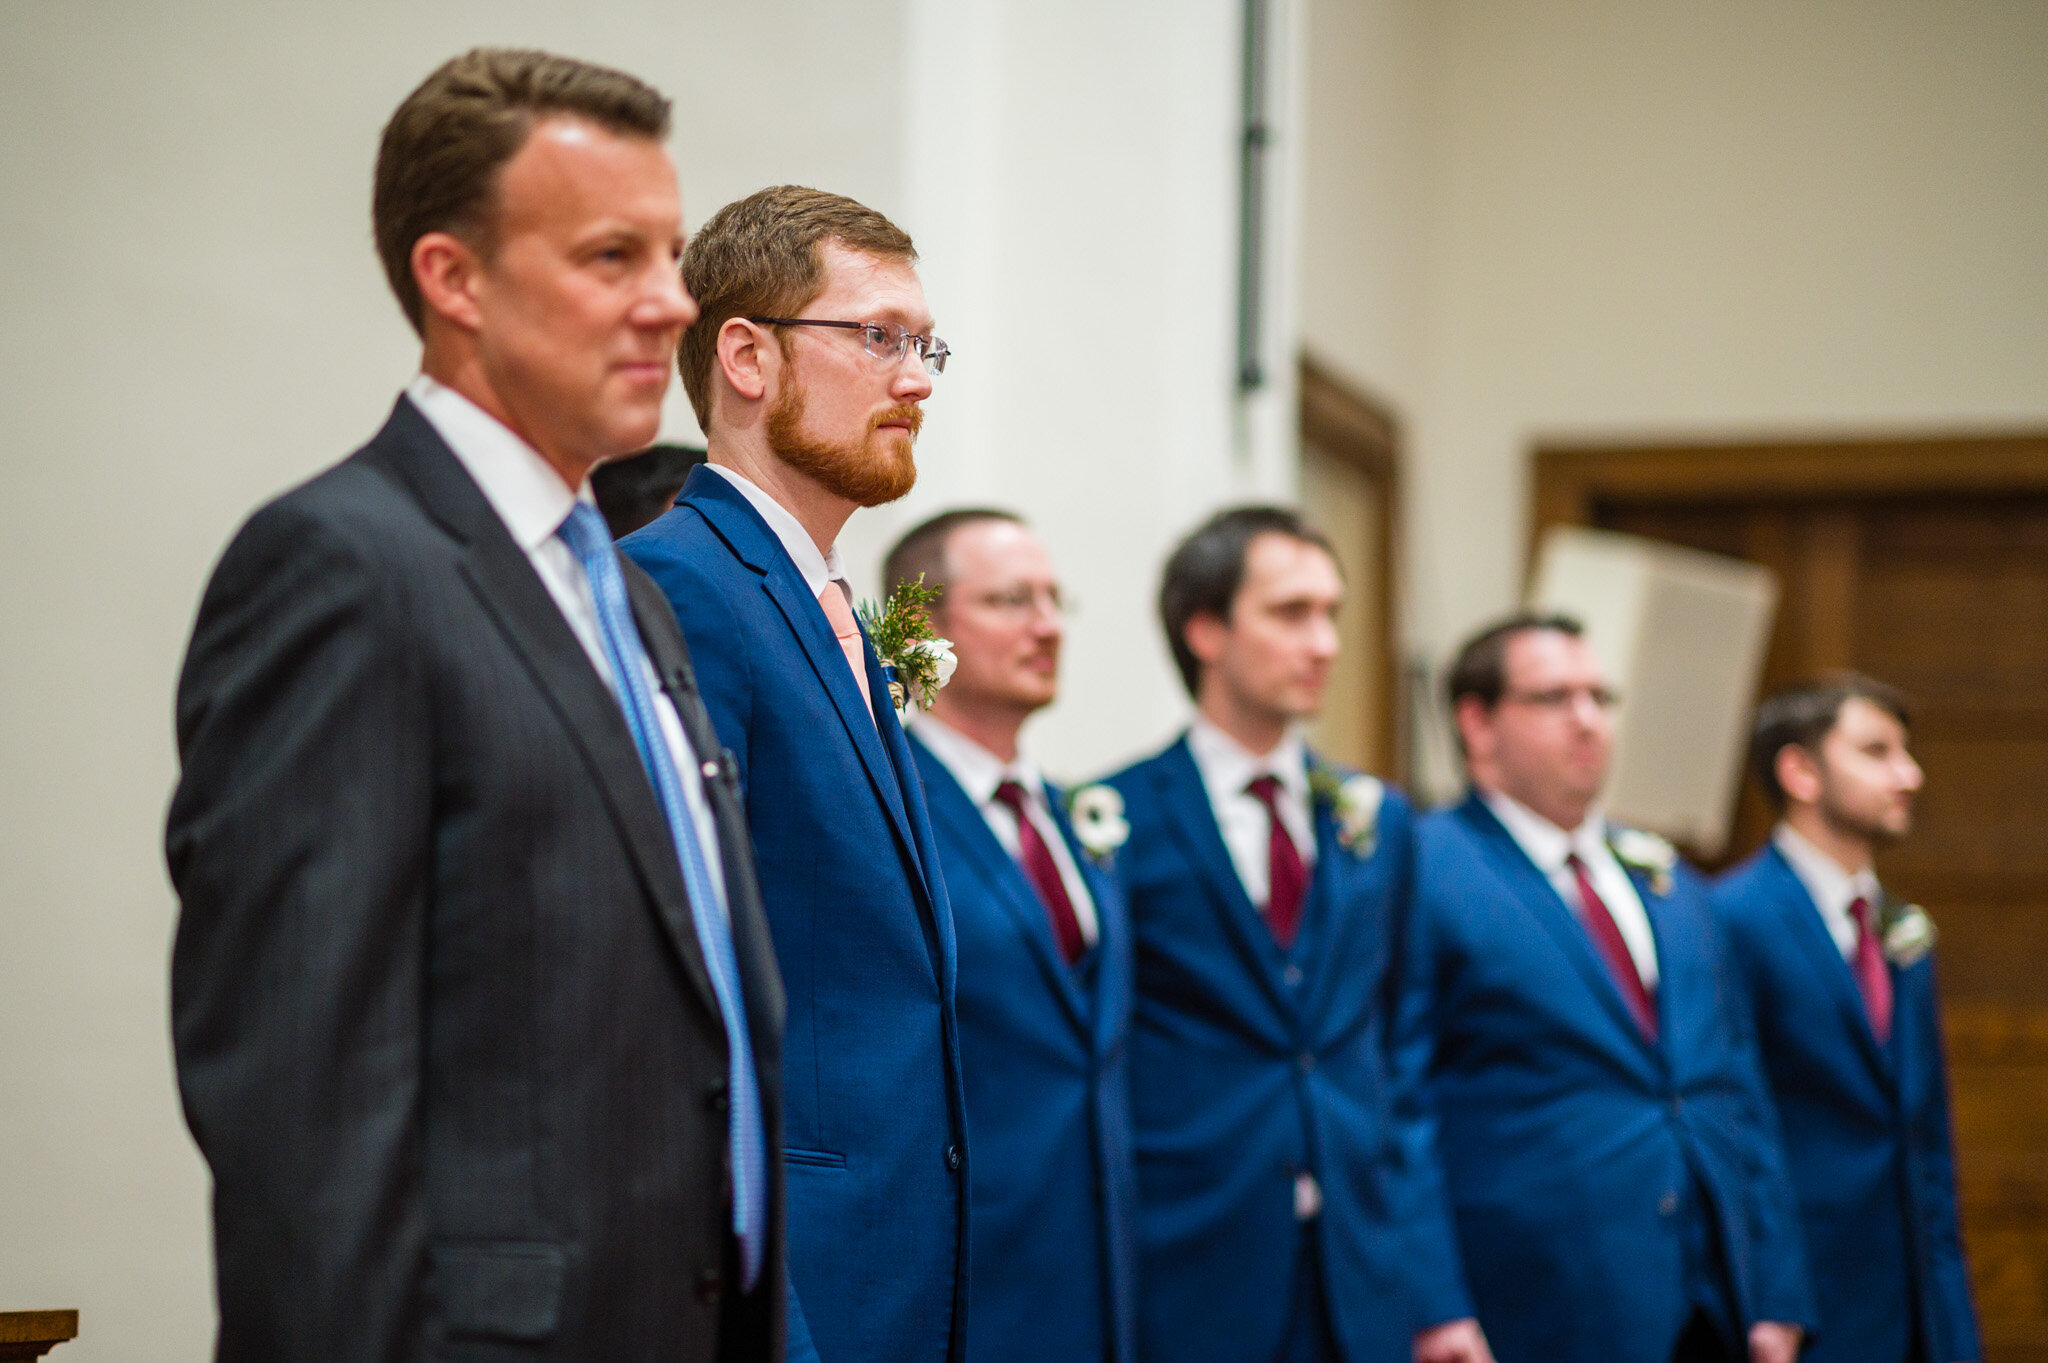 The groom and groomsmen watch the bride walking down the aisle.